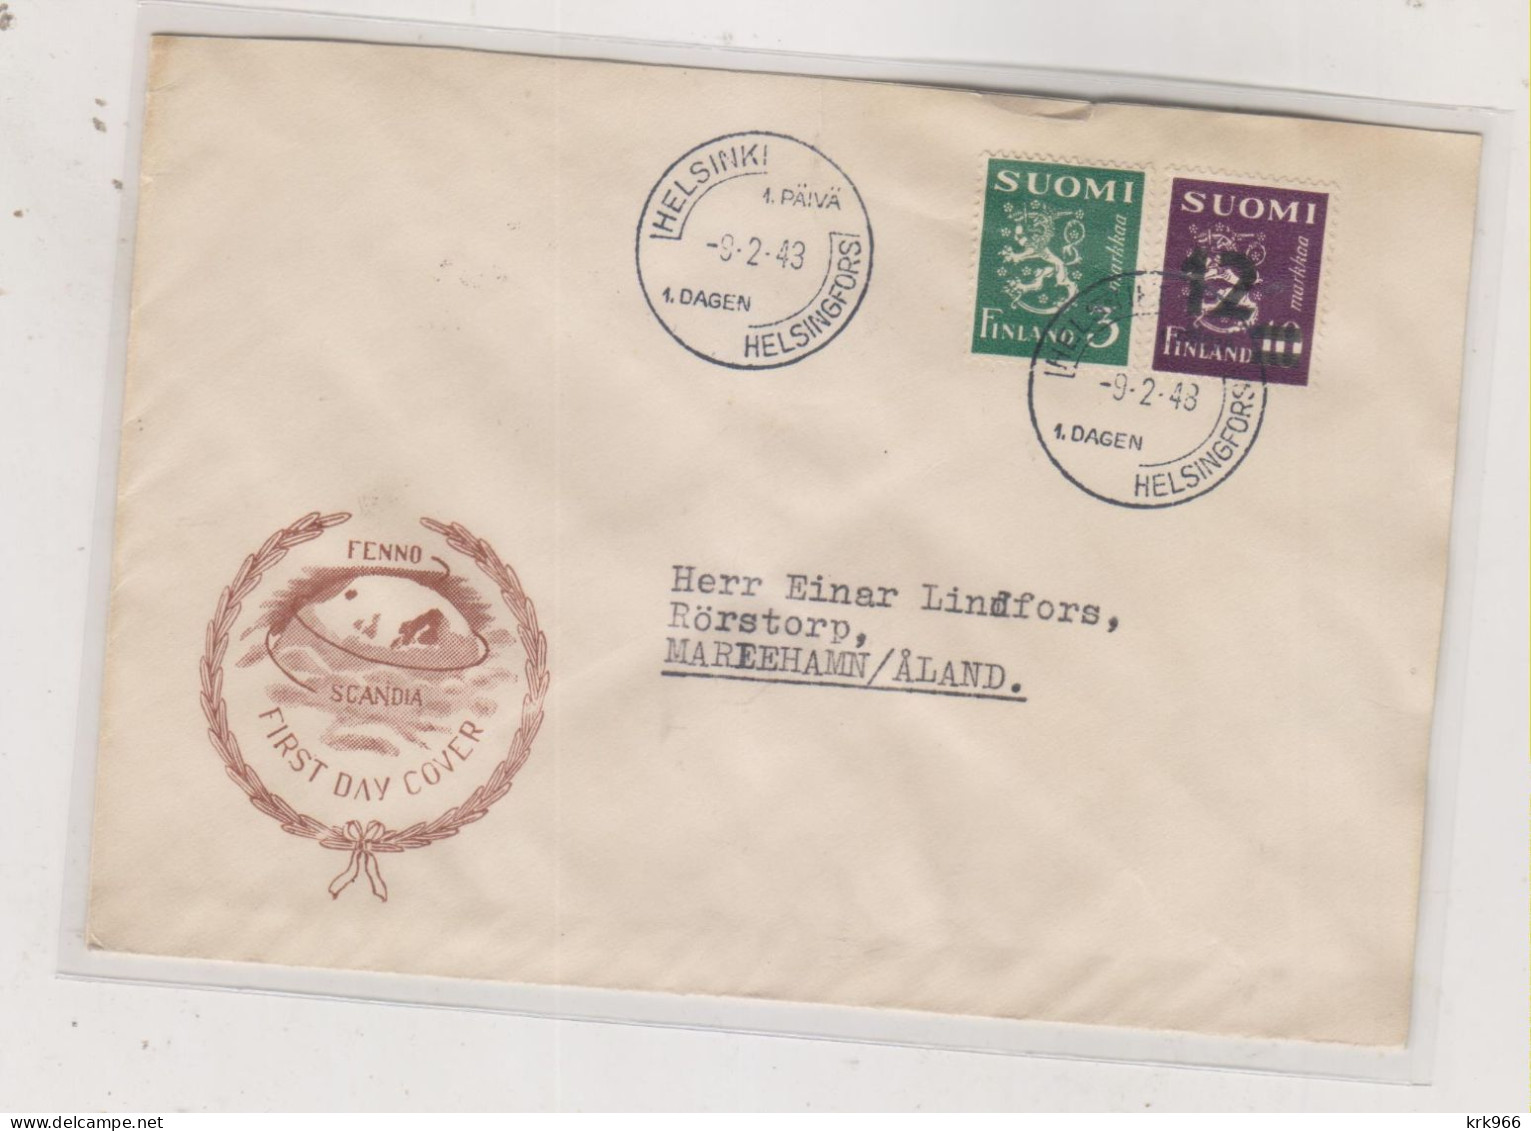 FINLAND 1943 HELSINKI FDC Cover - Covers & Documents